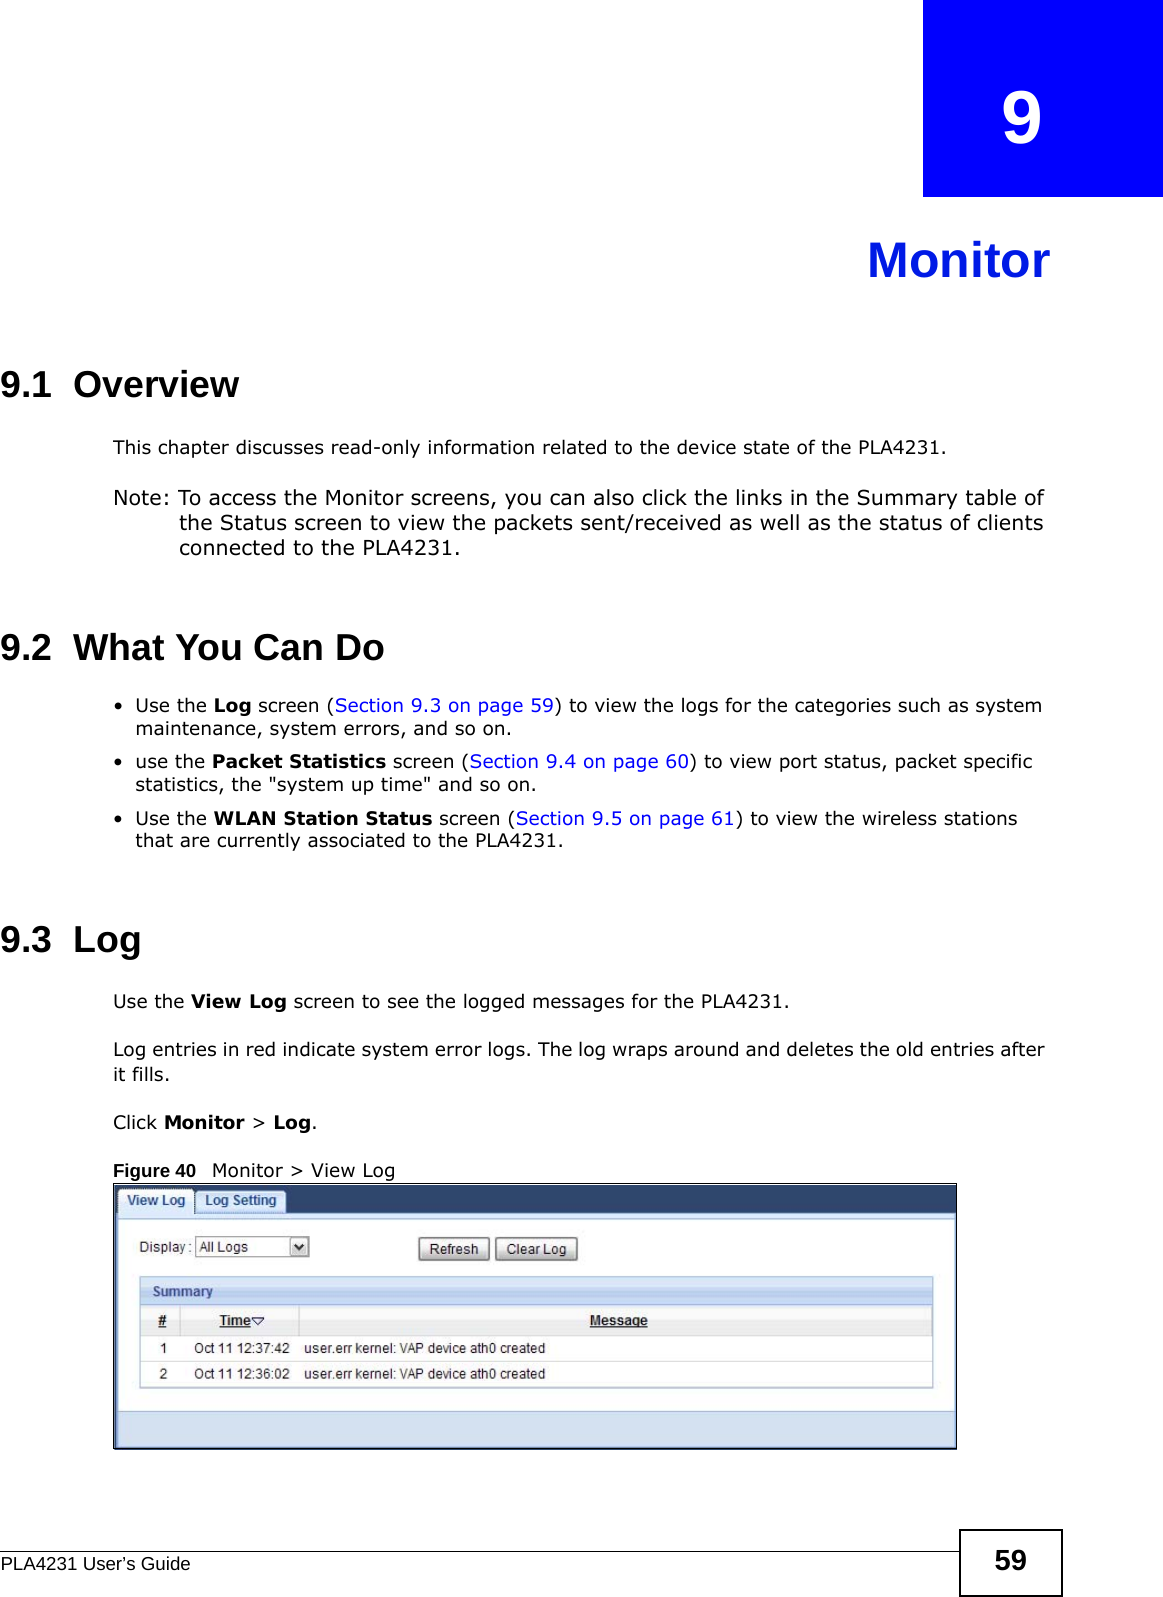 PLA4231 User’s Guide 59CHAPTER   9Monitor9.1  OverviewThis chapter discusses read-only information related to the device state of the PLA4231. Note: To access the Monitor screens, you can also click the links in the Summary table of the Status screen to view the packets sent/received as well as the status of clients connected to the PLA4231.9.2  What You Can Do•Use the Log screen (Section 9.3 on page 59) to view the logs for the categories such as system maintenance, system errors, and so on.•use the Packet Statistics screen (Section 9.4 on page 60) to view port status, packet specific statistics, the &quot;system up time&quot; and so on.•Use the WLAN Station Status screen (Section 9.5 on page 61) to view the wireless stations that are currently associated to the PLA4231.9.3  LogUse the View Log screen to see the logged messages for the PLA4231. Log entries in red indicate system error logs. The log wraps around and deletes the old entries after it fills. Click Monitor &gt; Log.Figure 40   Monitor &gt; View Log 